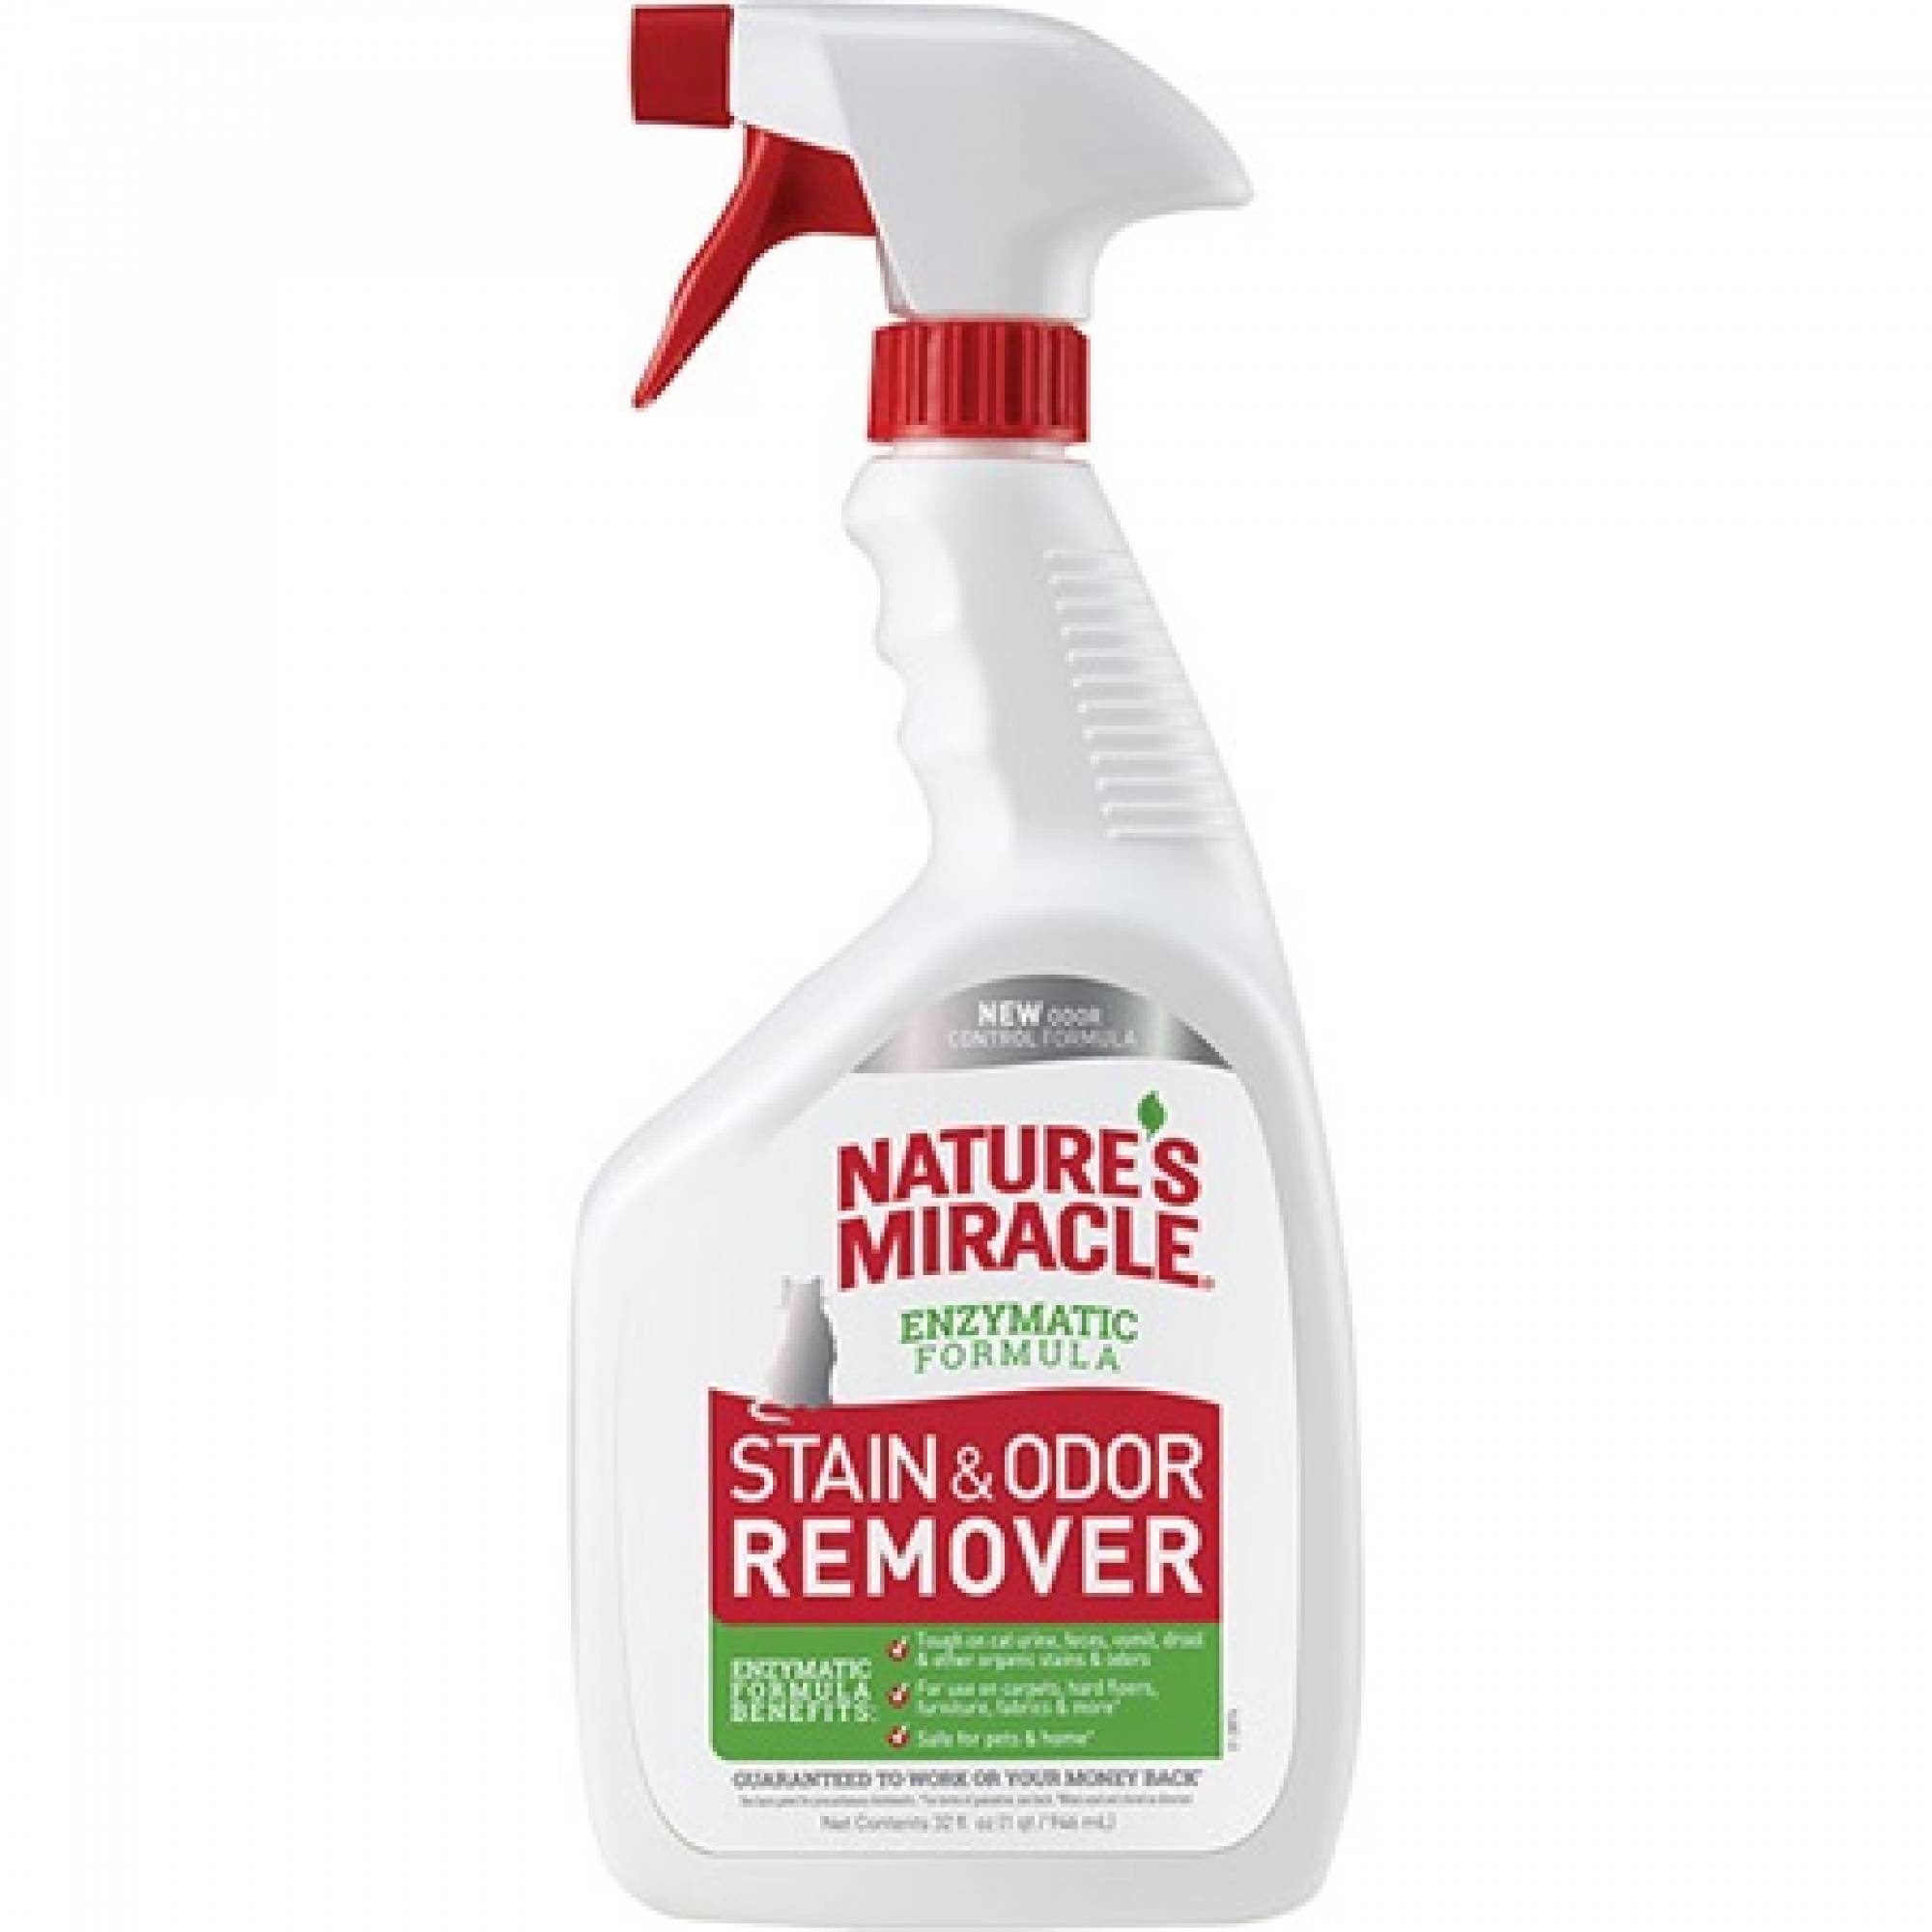 Nature's Miracle Just for Cats Stain and Odor Remover with Enzymatic Formula 32oz